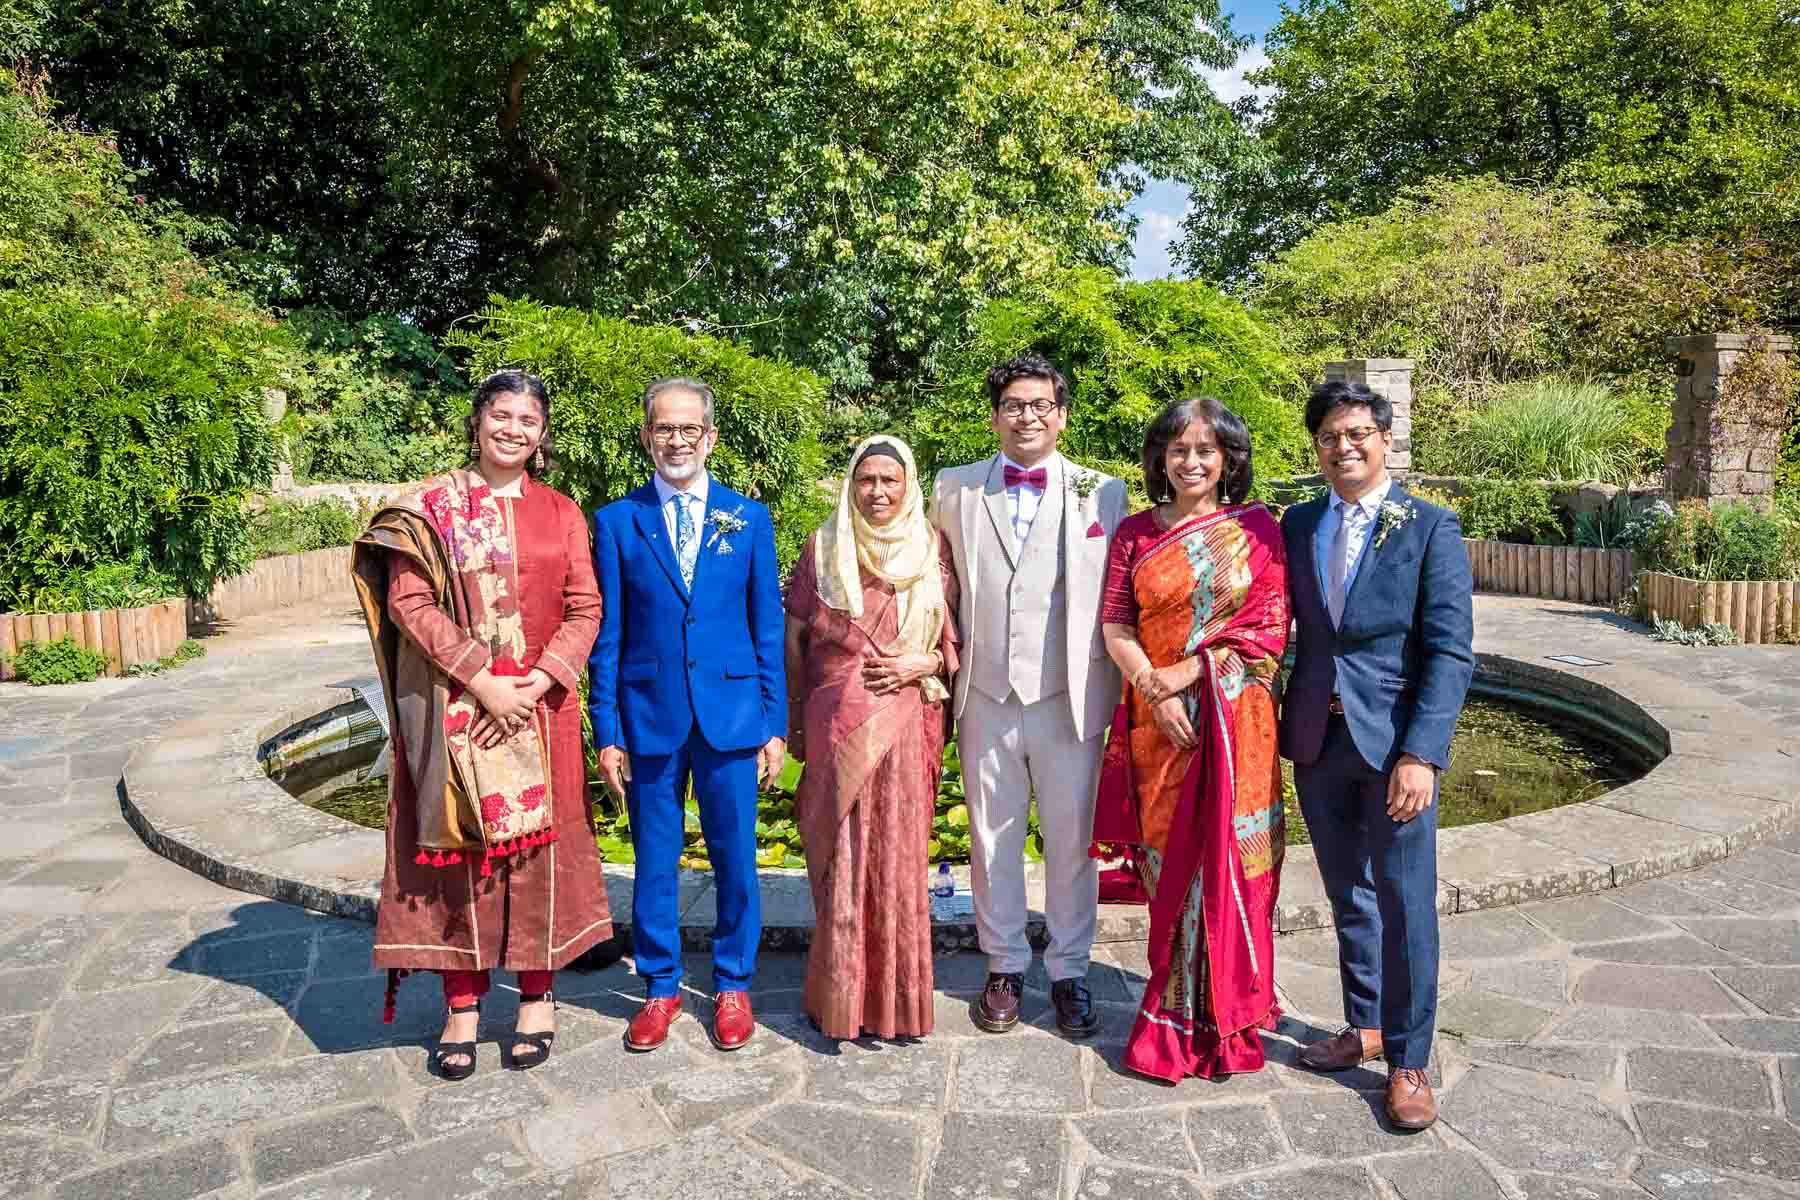 Indian family wedding photo in the sunshine at Danson Park